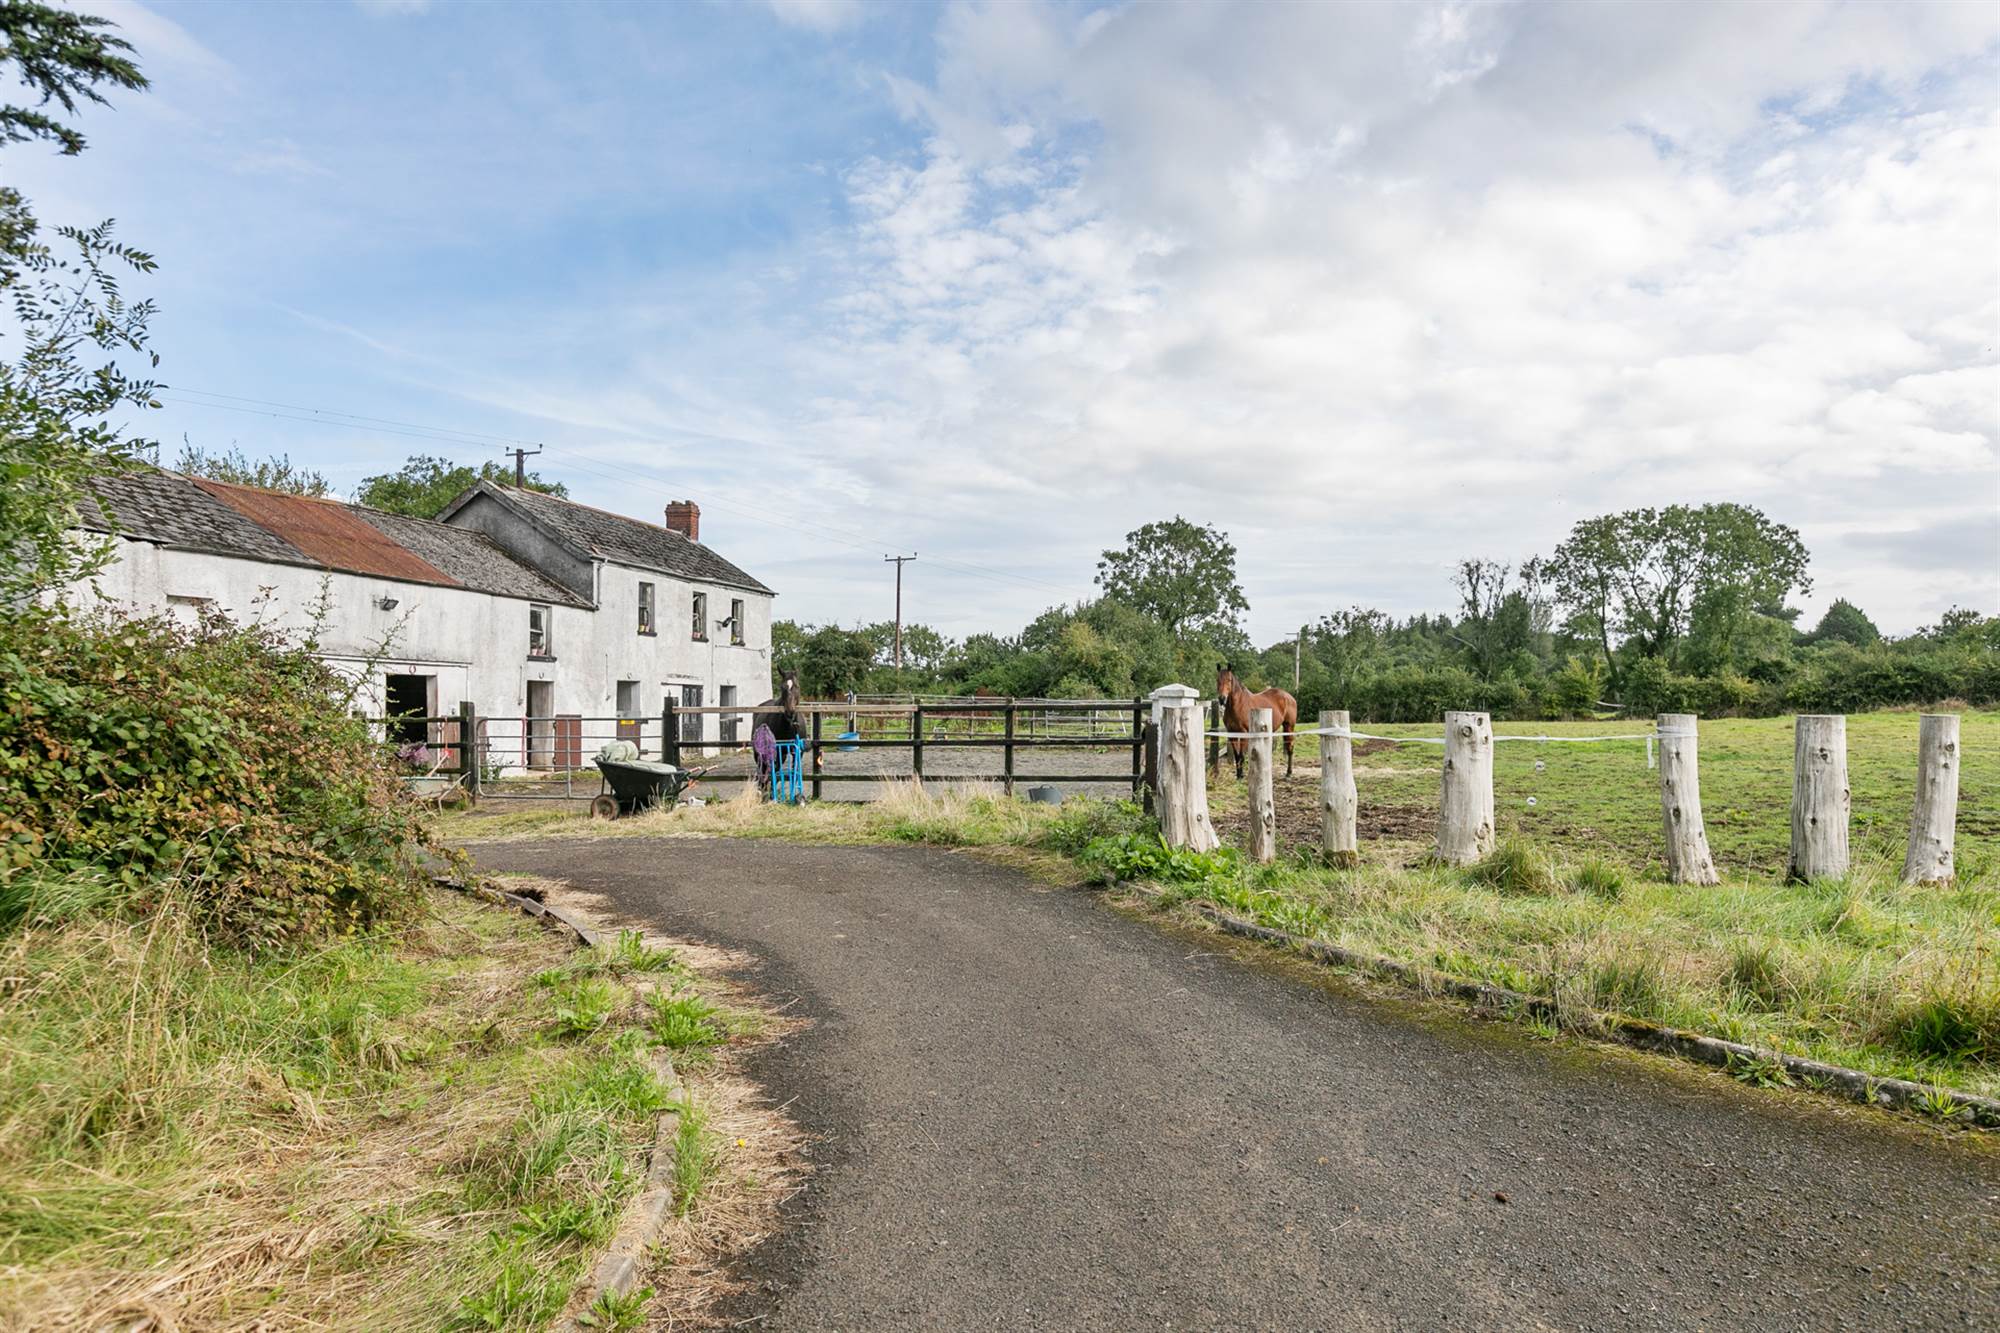 Detached Bungalow with 3x Building Sites & 8 Acres of Land at 45 Ballymacvea Road